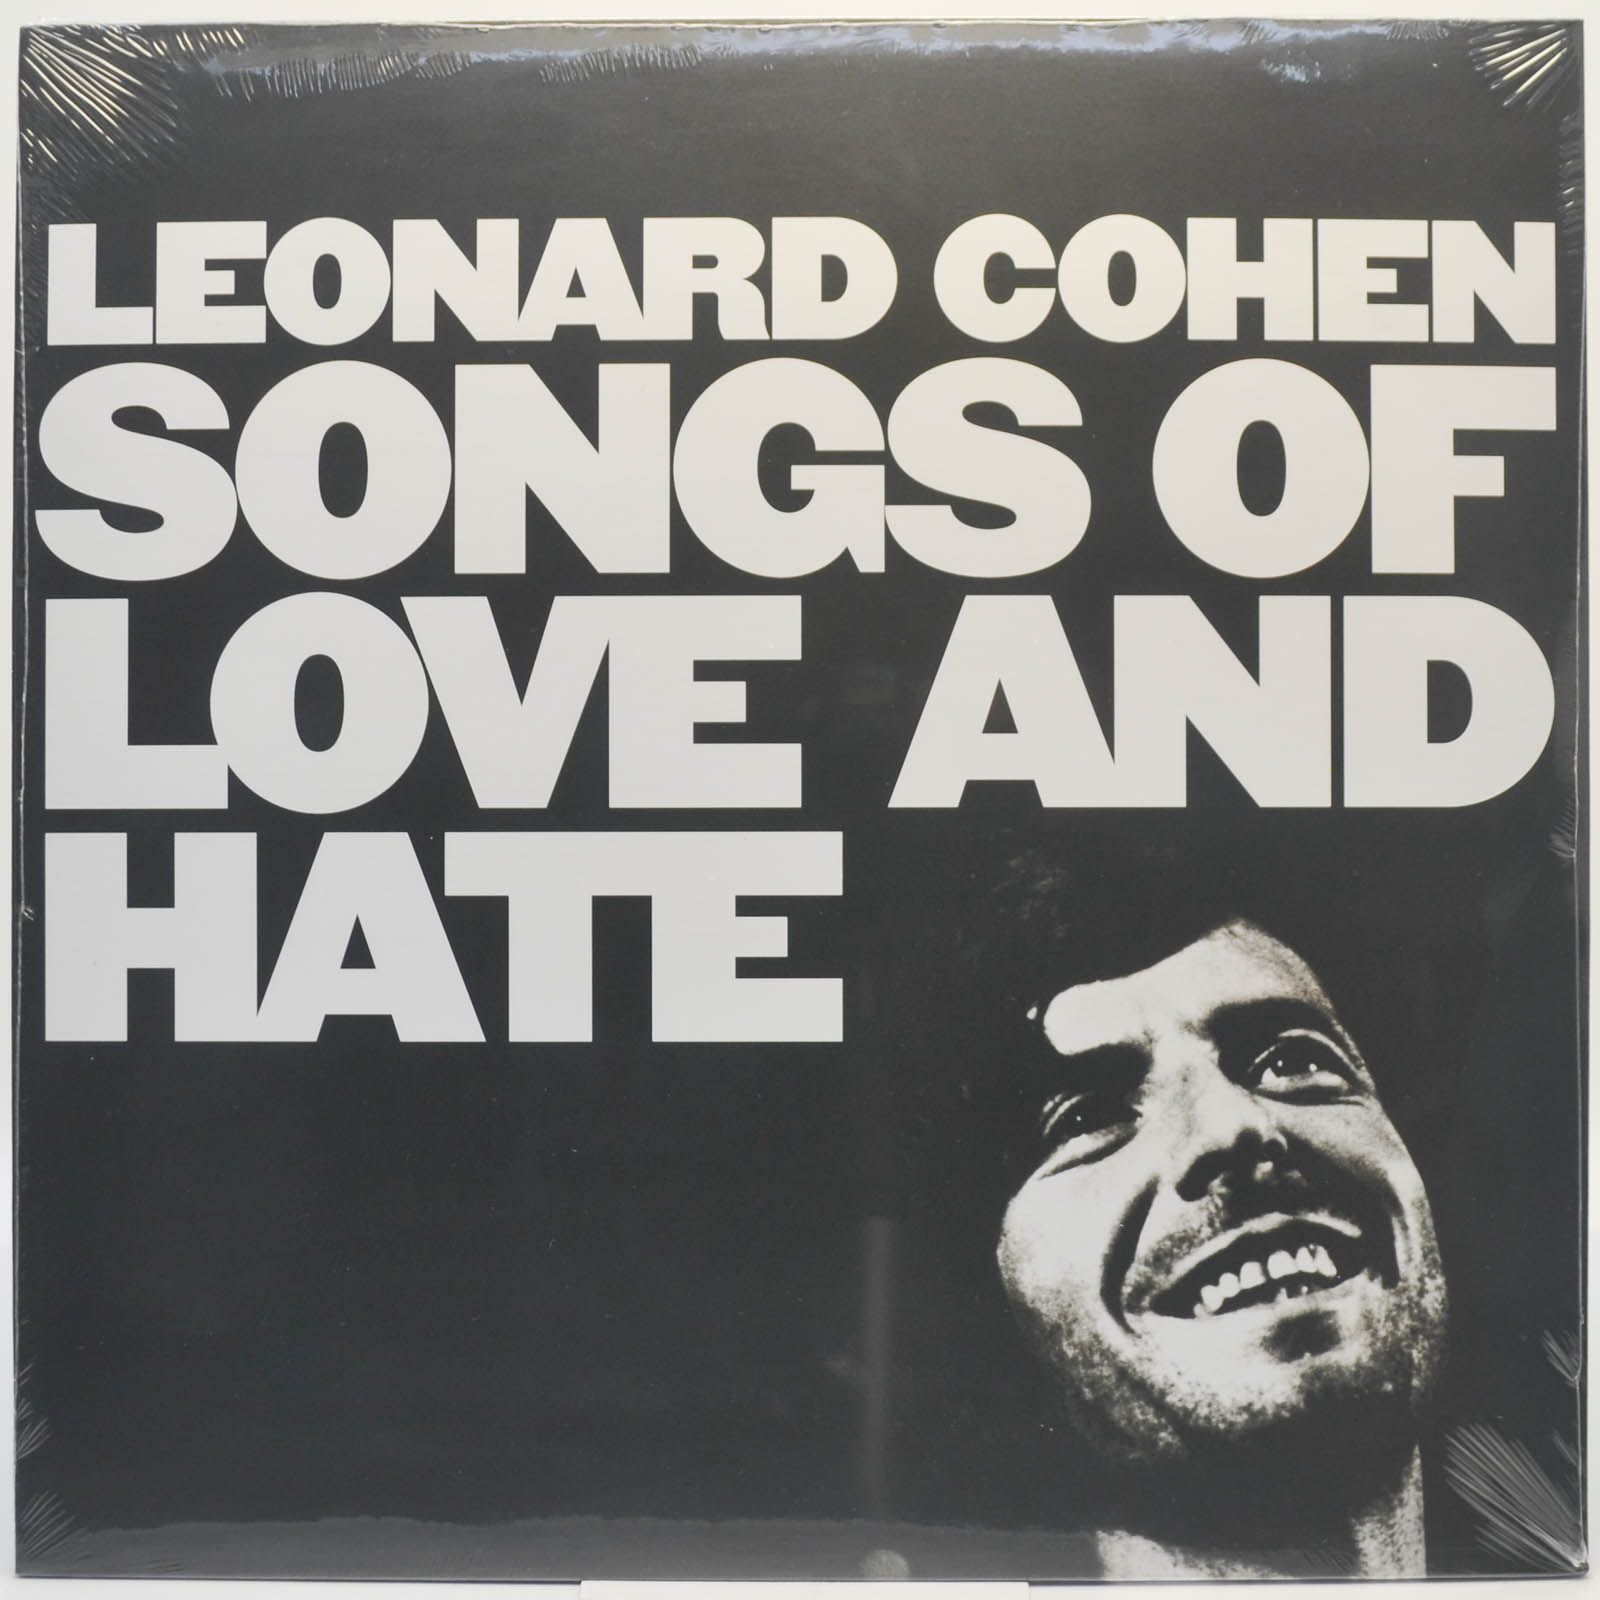 Leonard Cohen — Songs Of Love And Hate, 1971